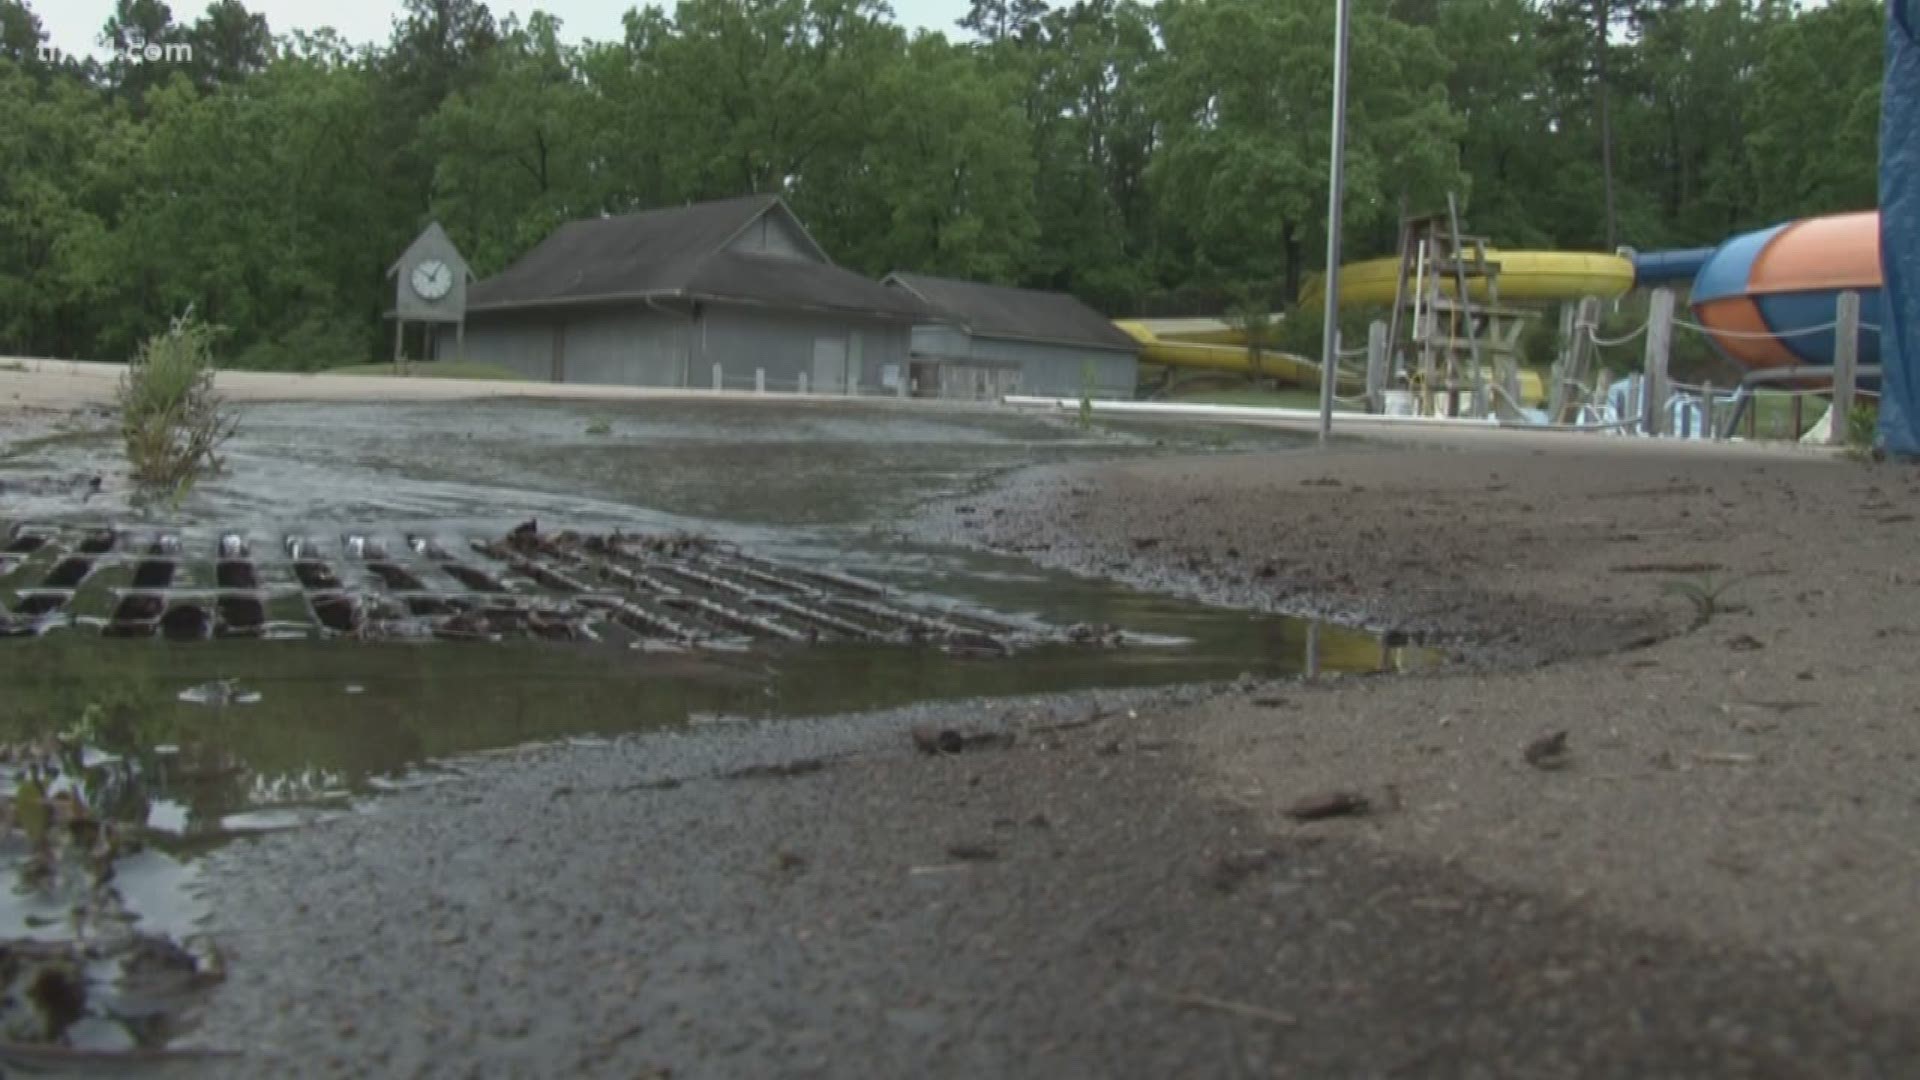 The torrential rain from the storms caused major problems for the North Little Rock water park.